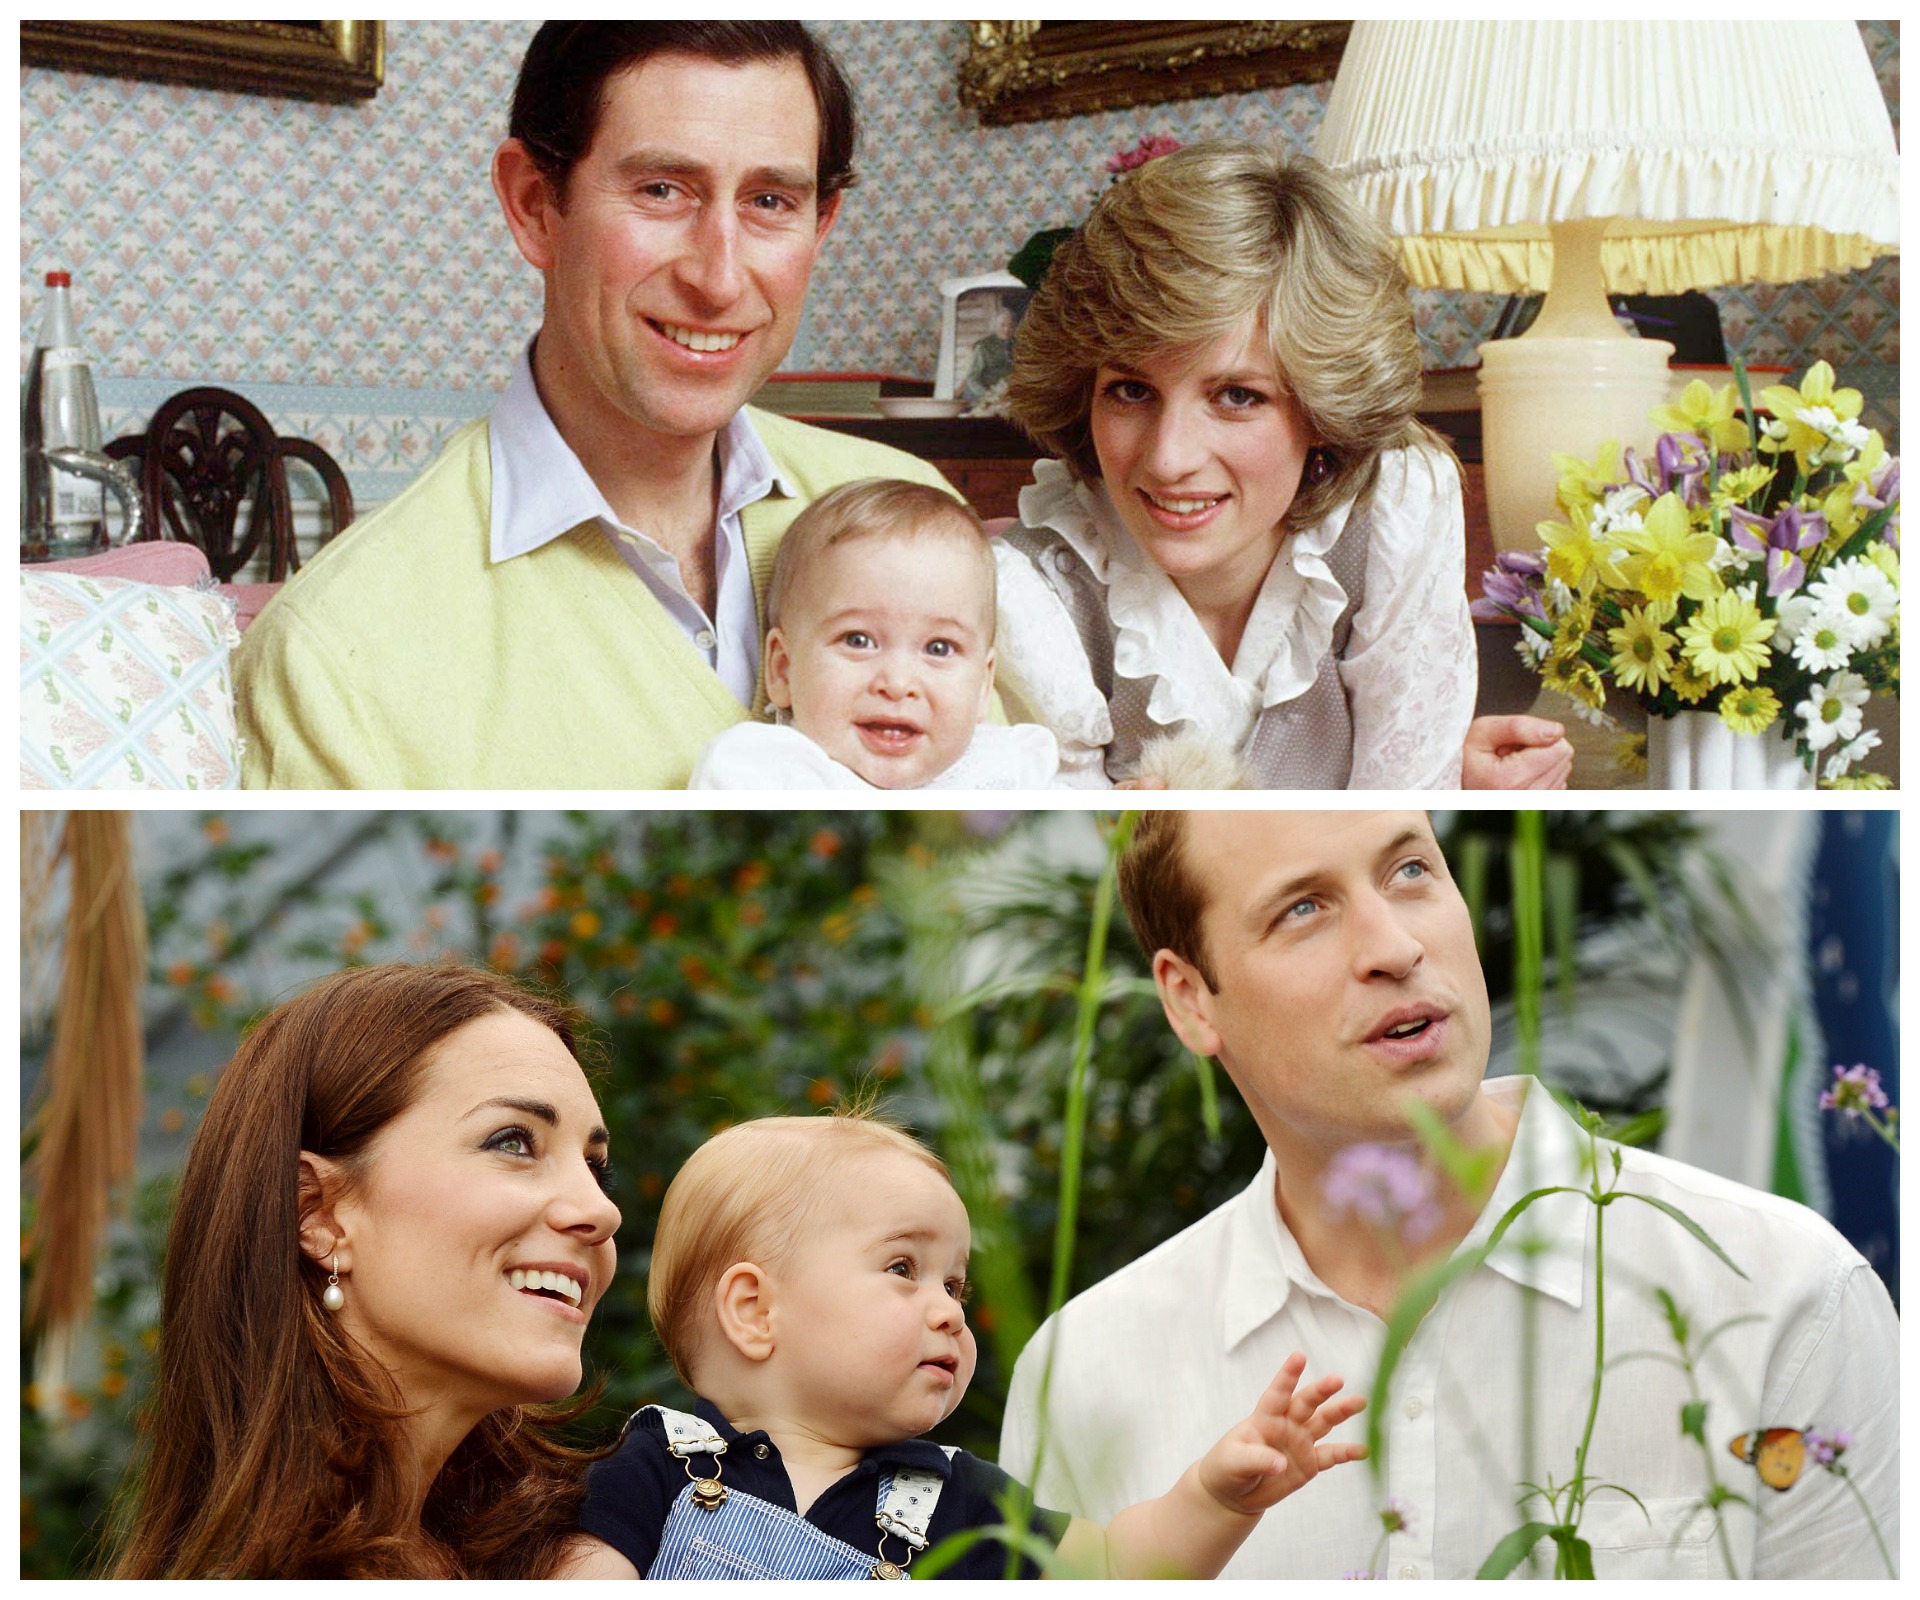 Spot the difference: We compare Baby William to Baby George.